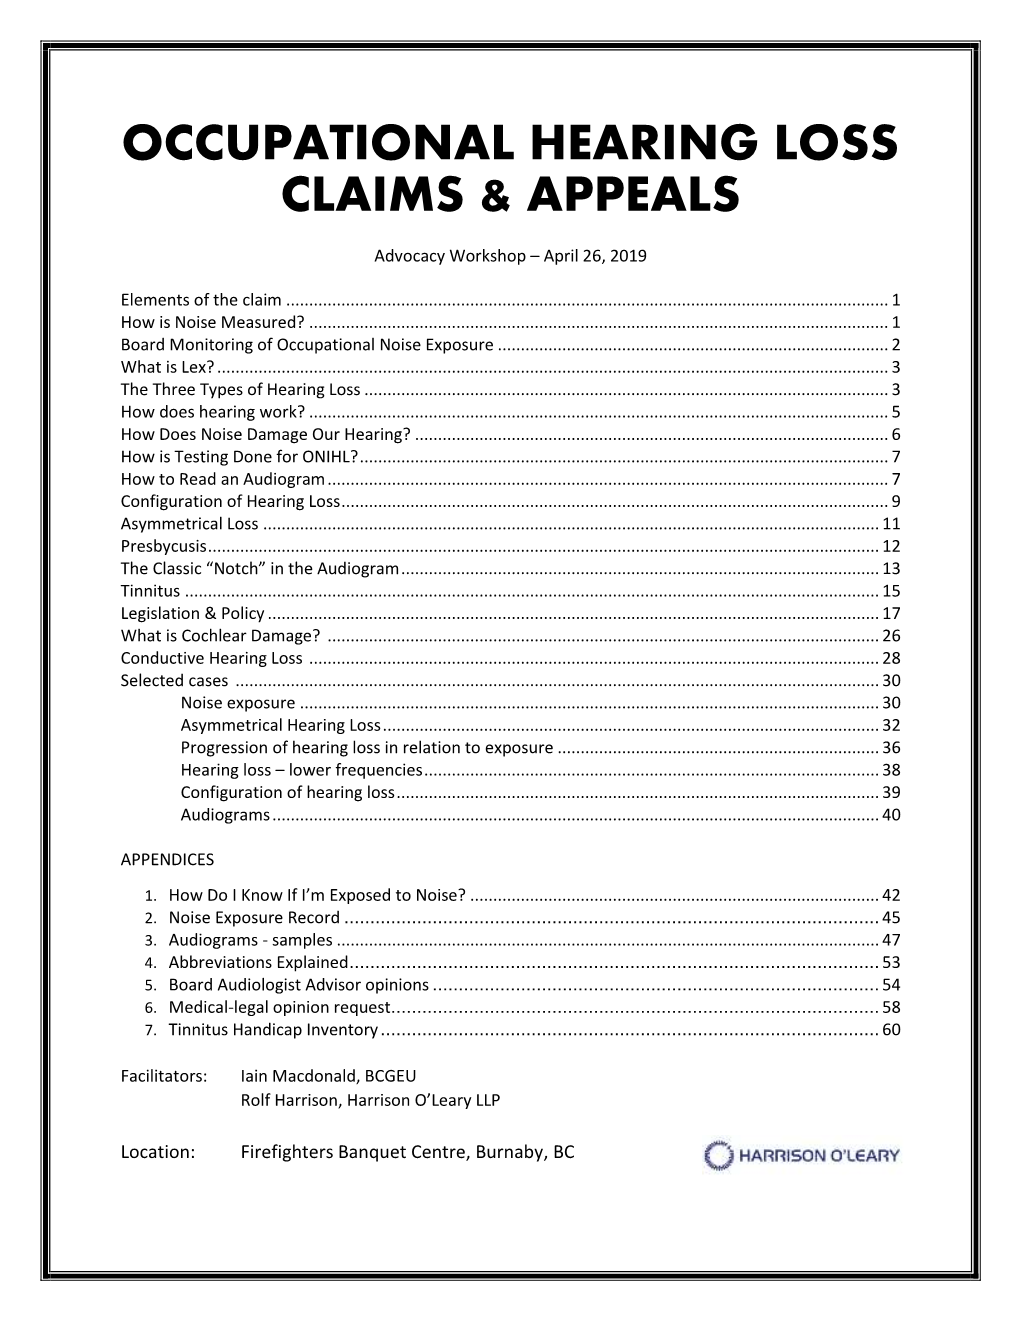 Occupational Hearing Loss Claims & Appeals